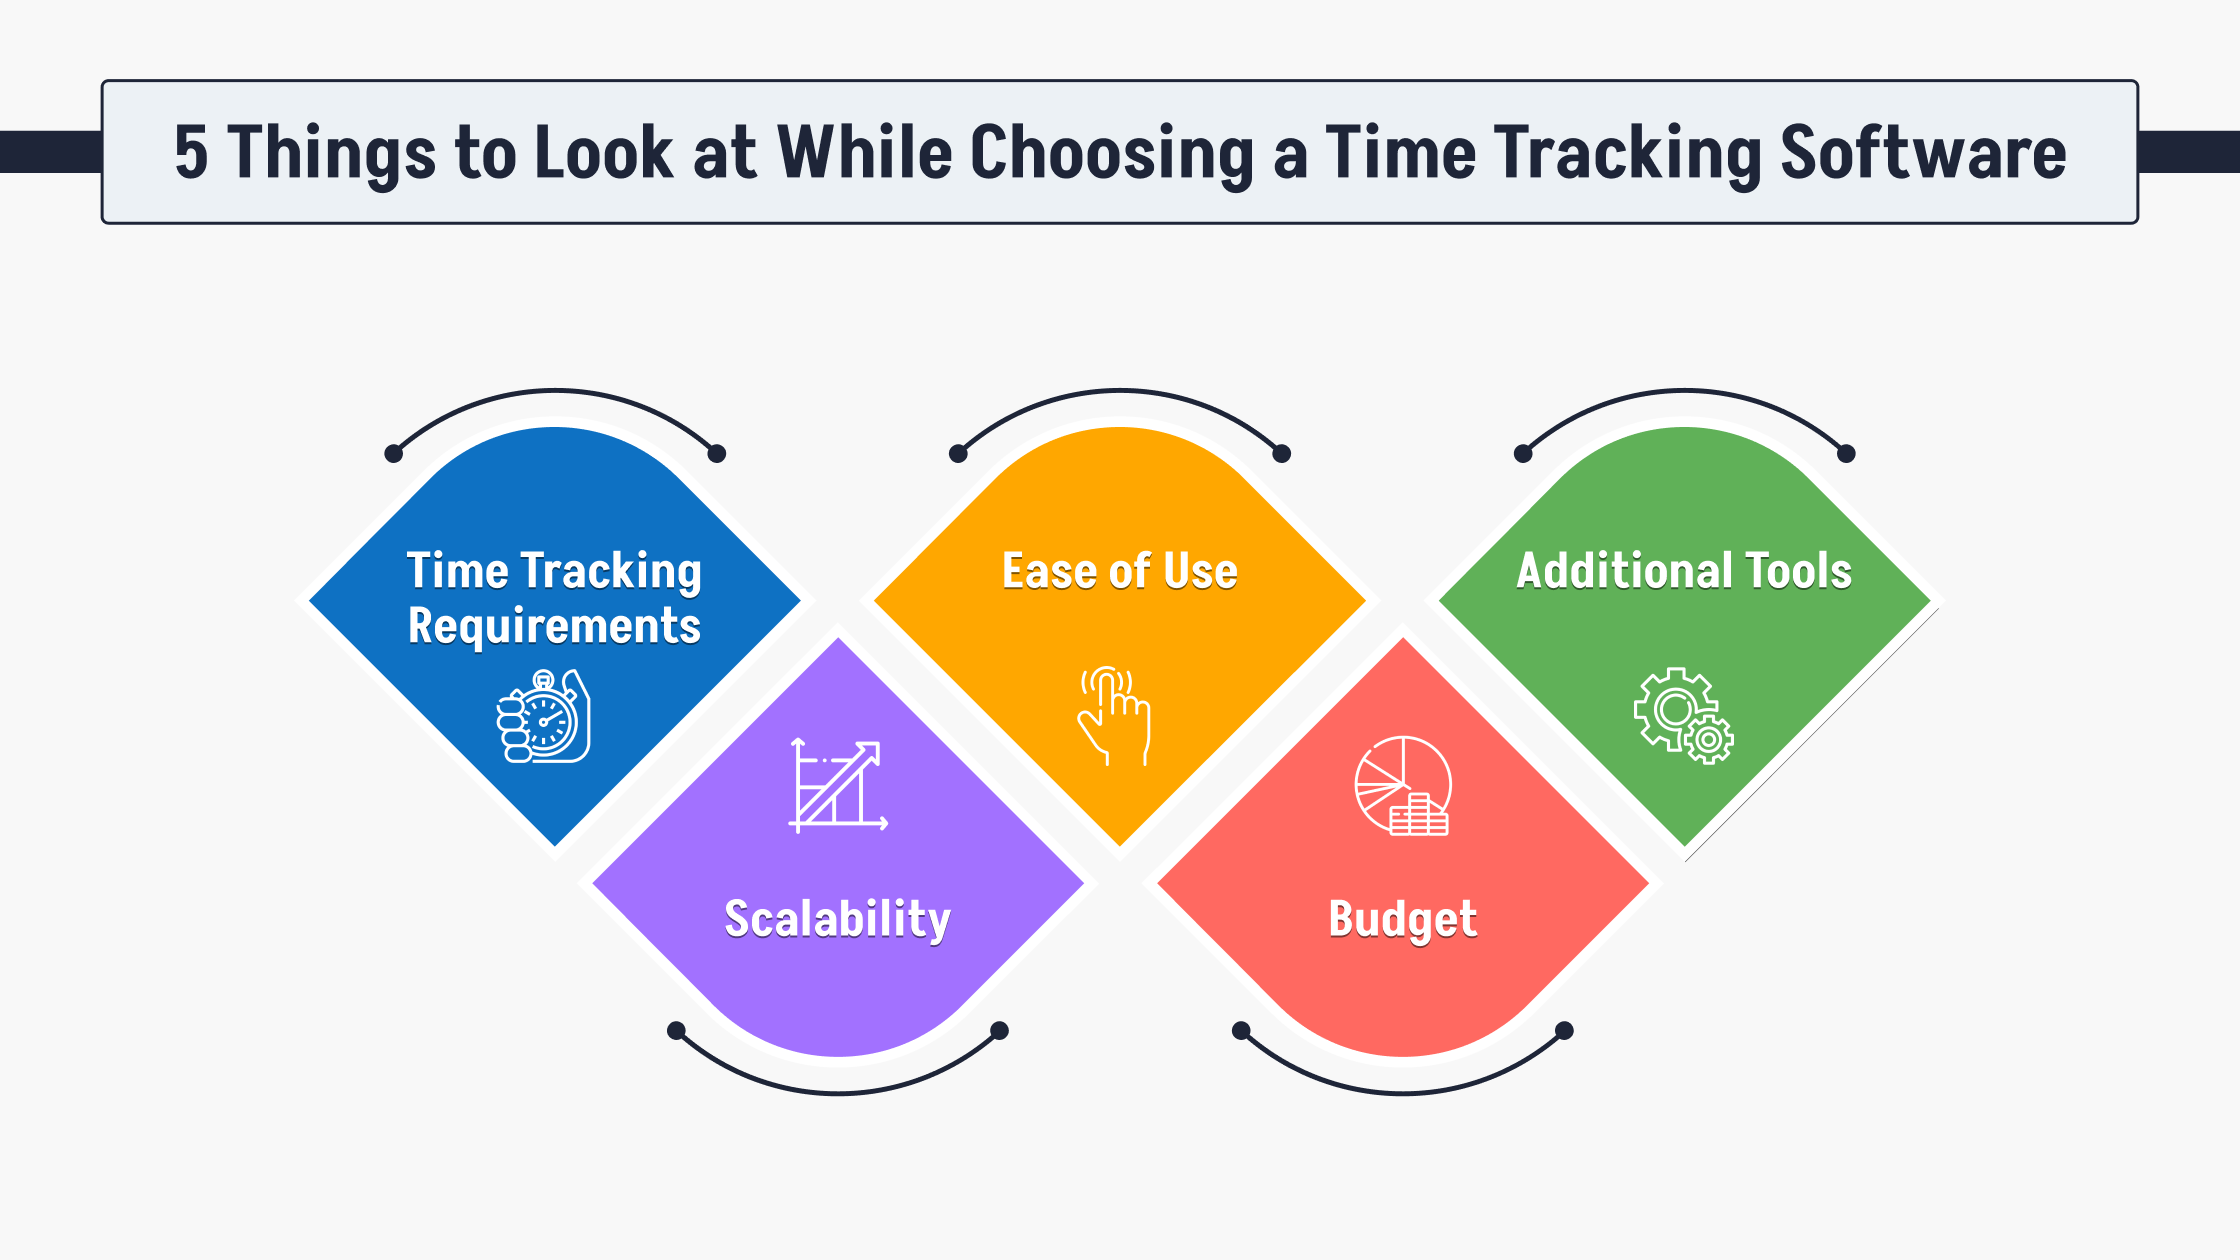 5 Things to Look at While Choosing a Time Tracking Software